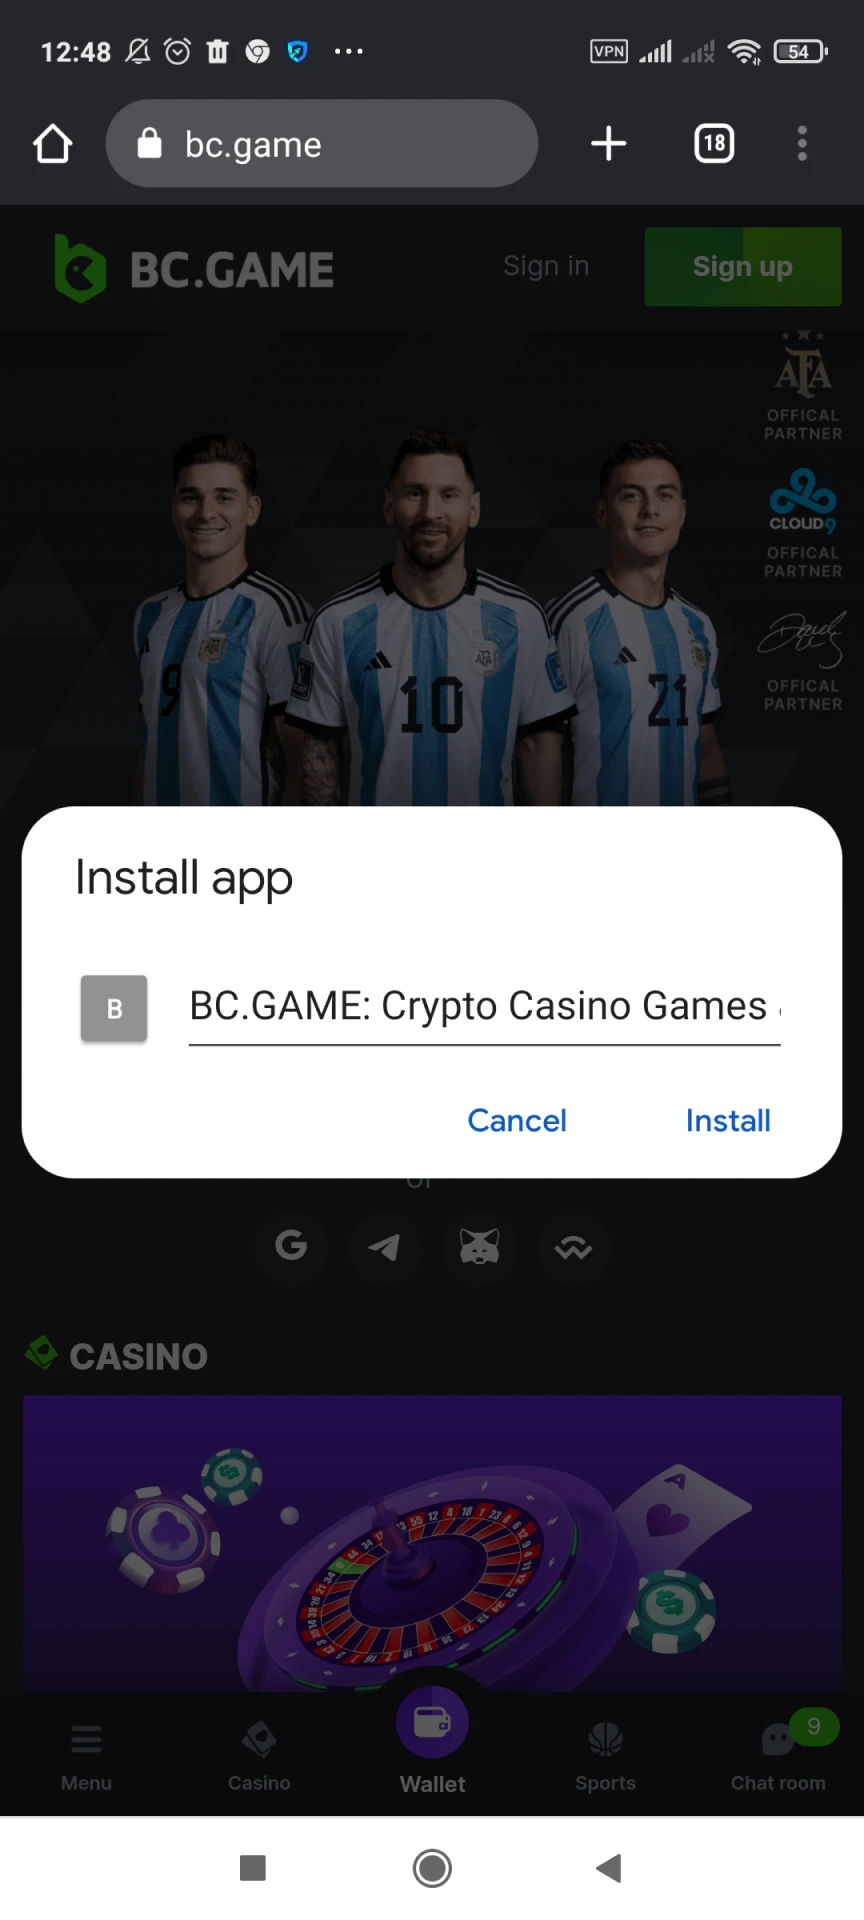 How To Find The Time To BC.Game for Mexican players On Google in 2021